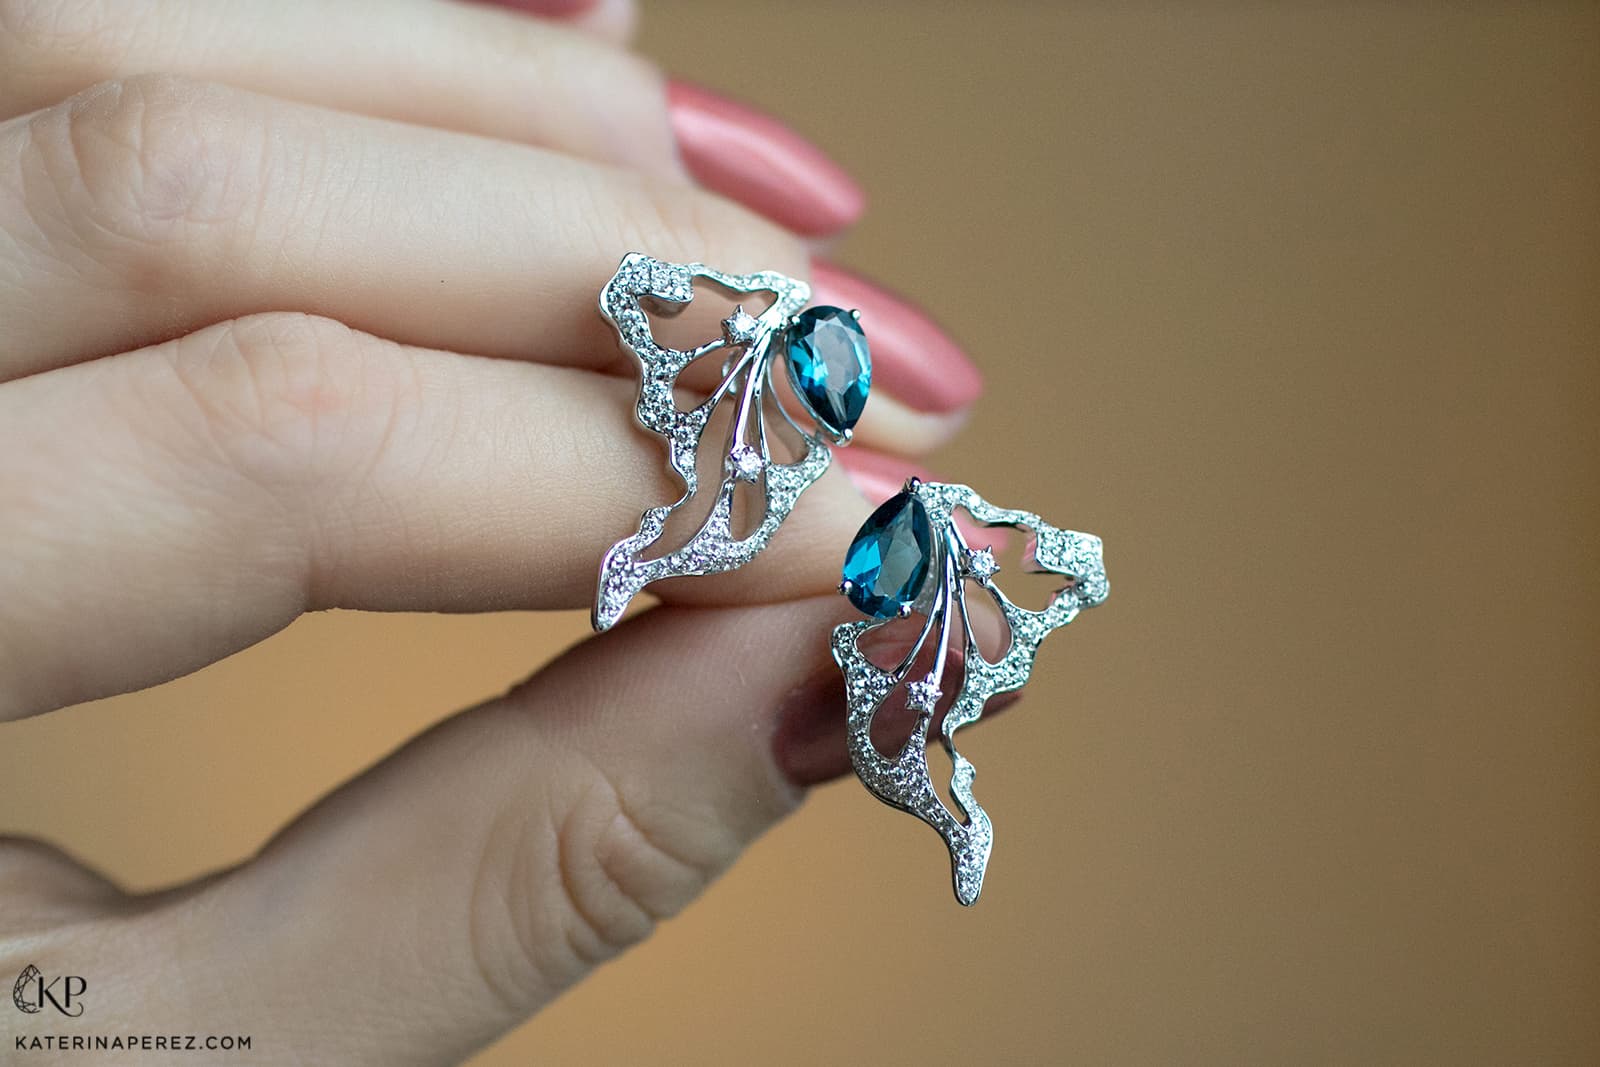 Simone Jewels x Katerina Perez jewellery collaboration earrings with blue topaz and diamonds in recycled white gold